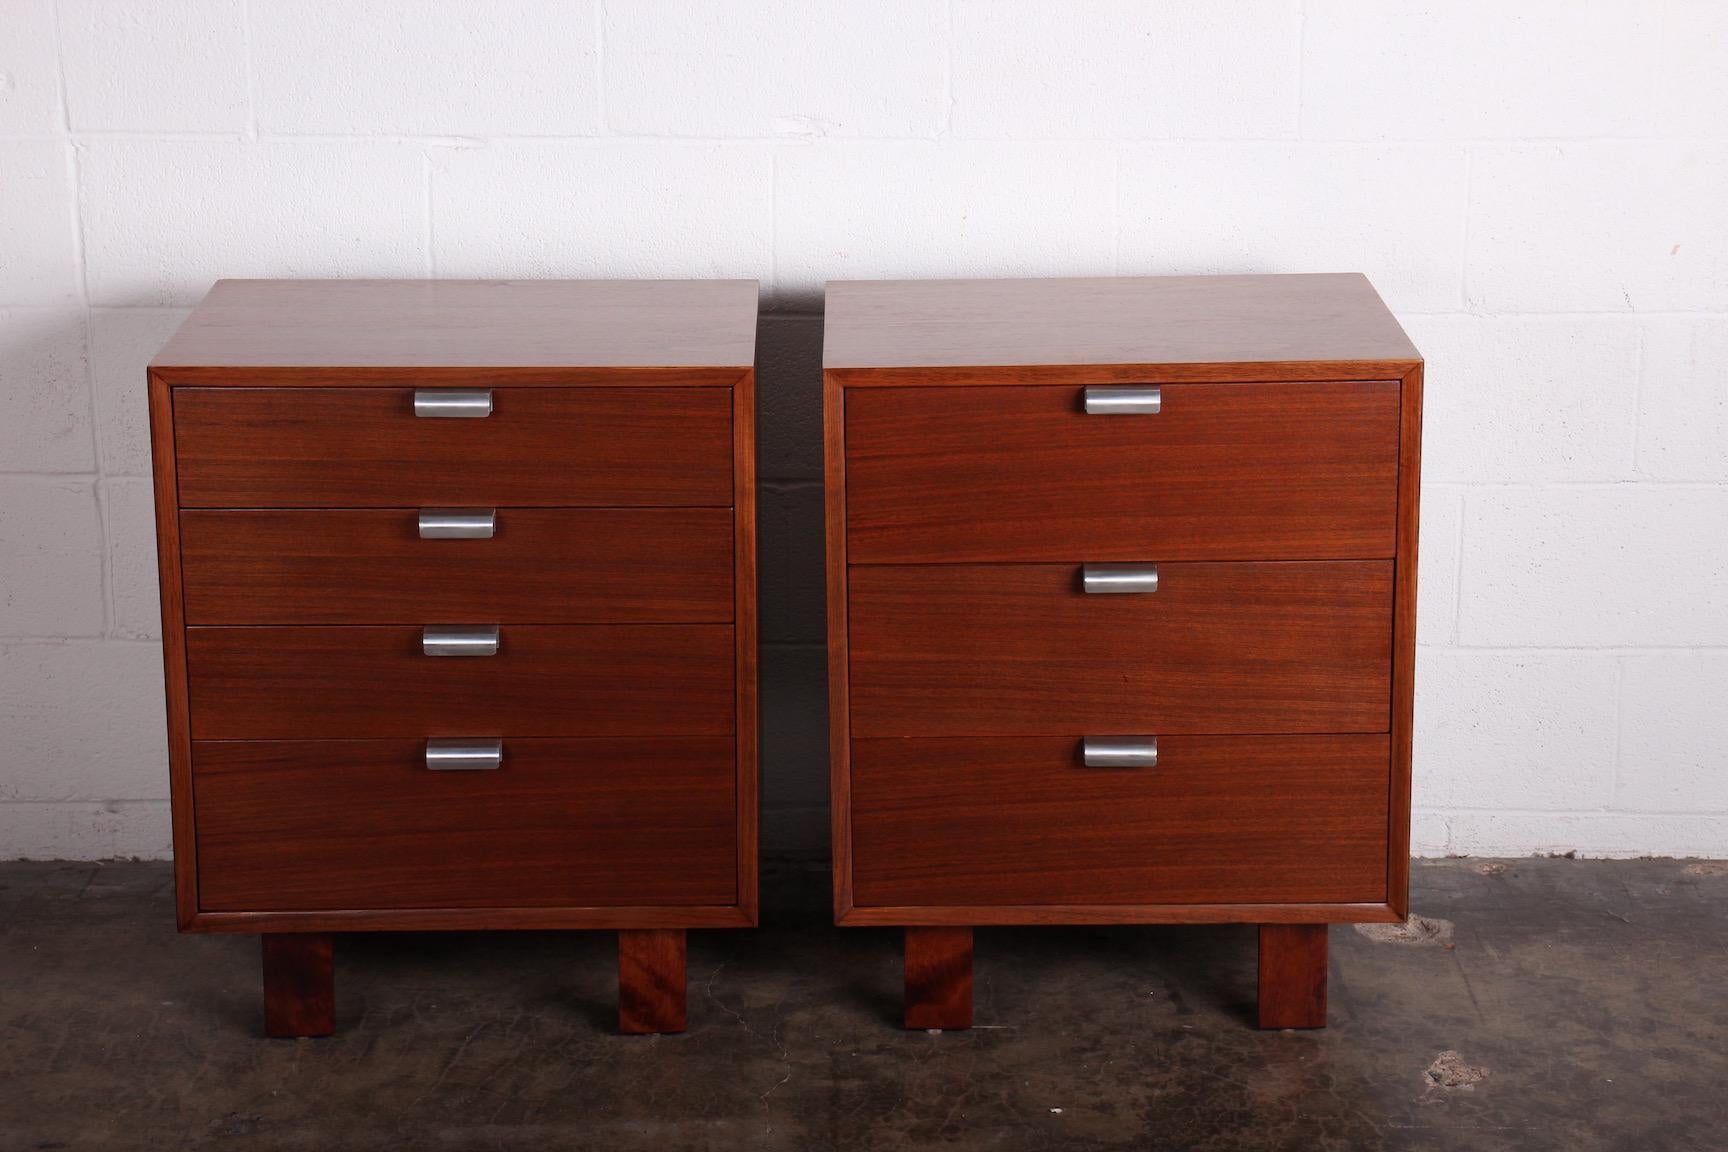 A pair of walnut nightstands with aluminum handles. Designed by George Nelson for Herman Miller.